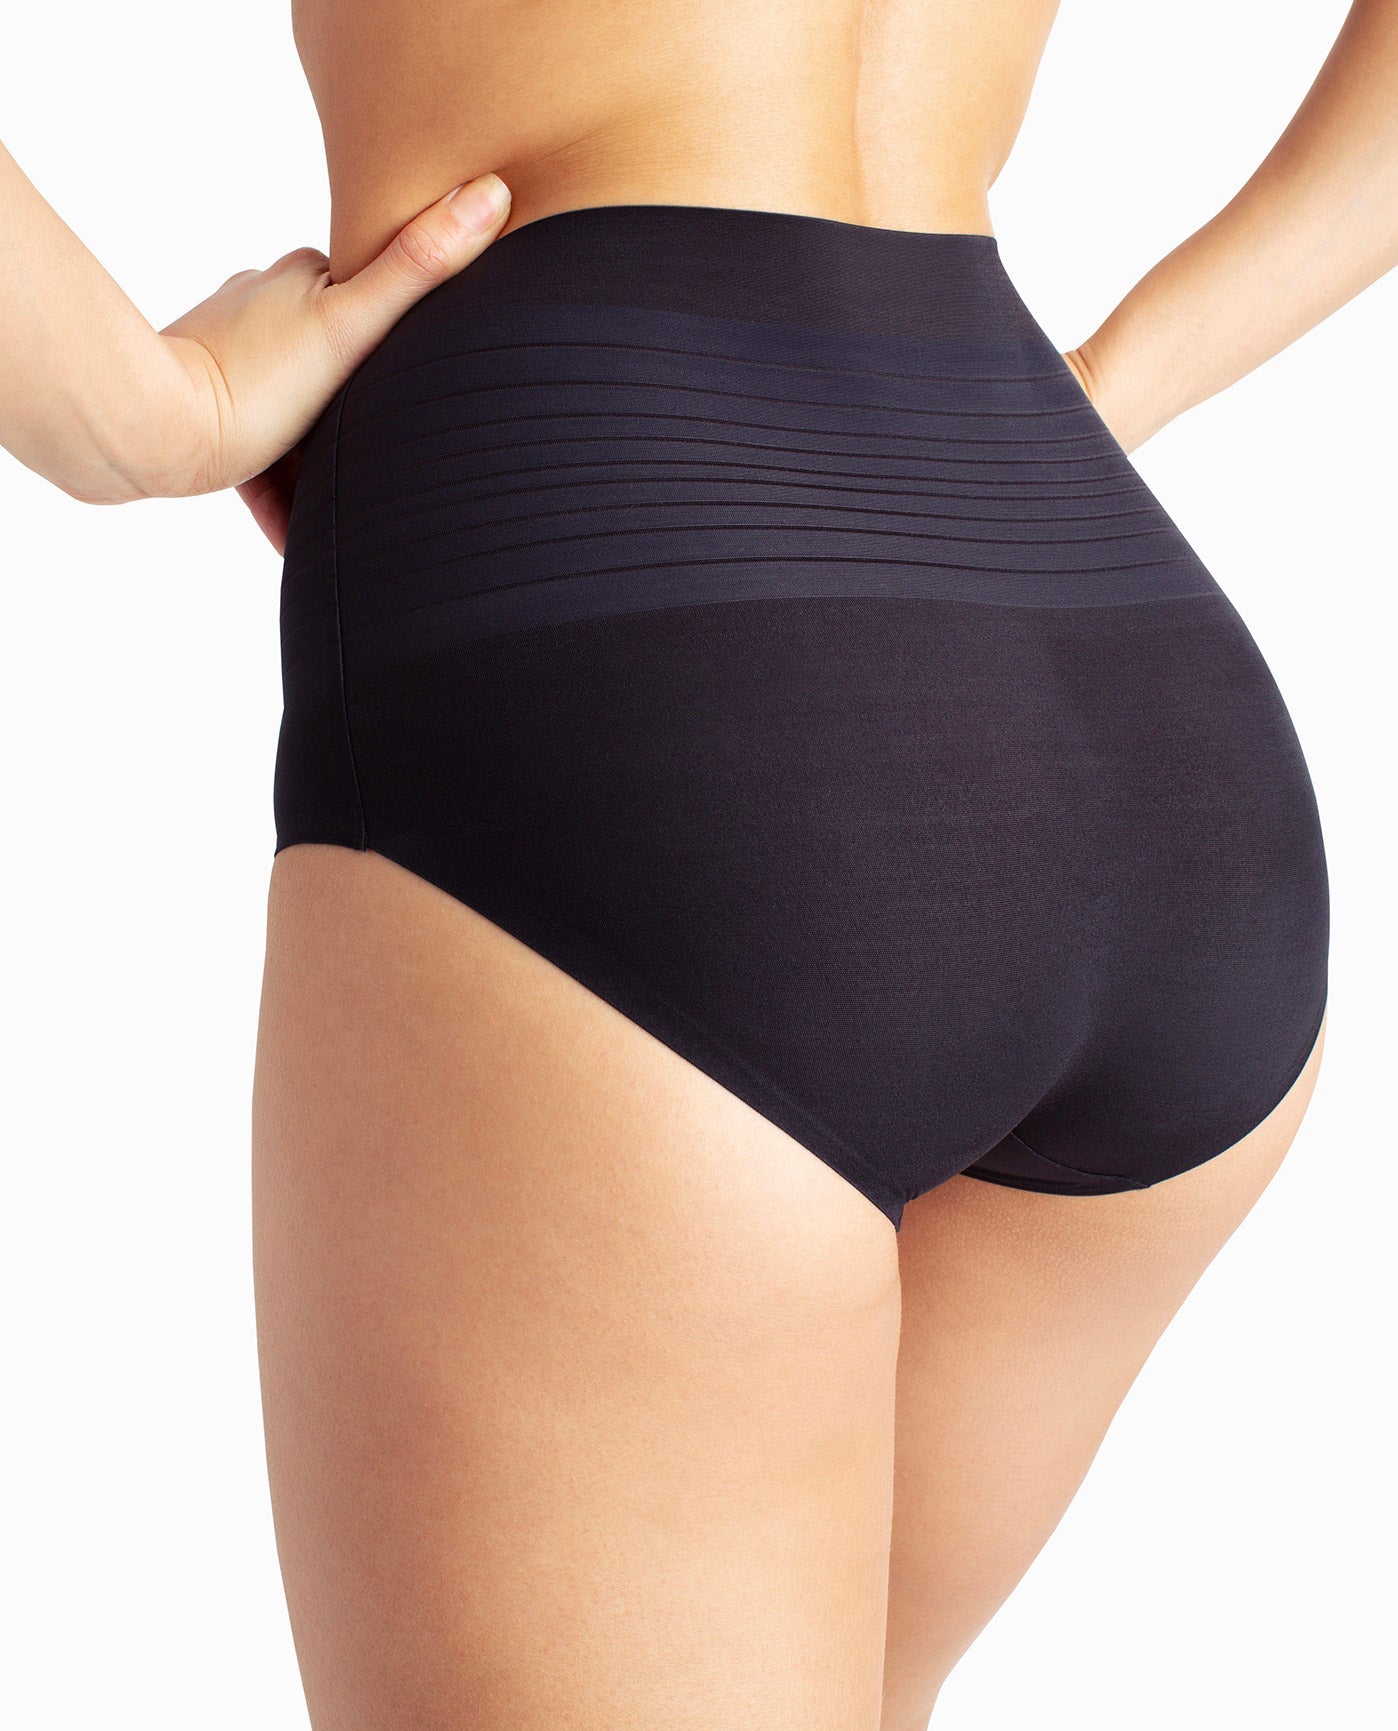 New Skinny Girl Women's Small 3- Pack Shaping Seamless Brief